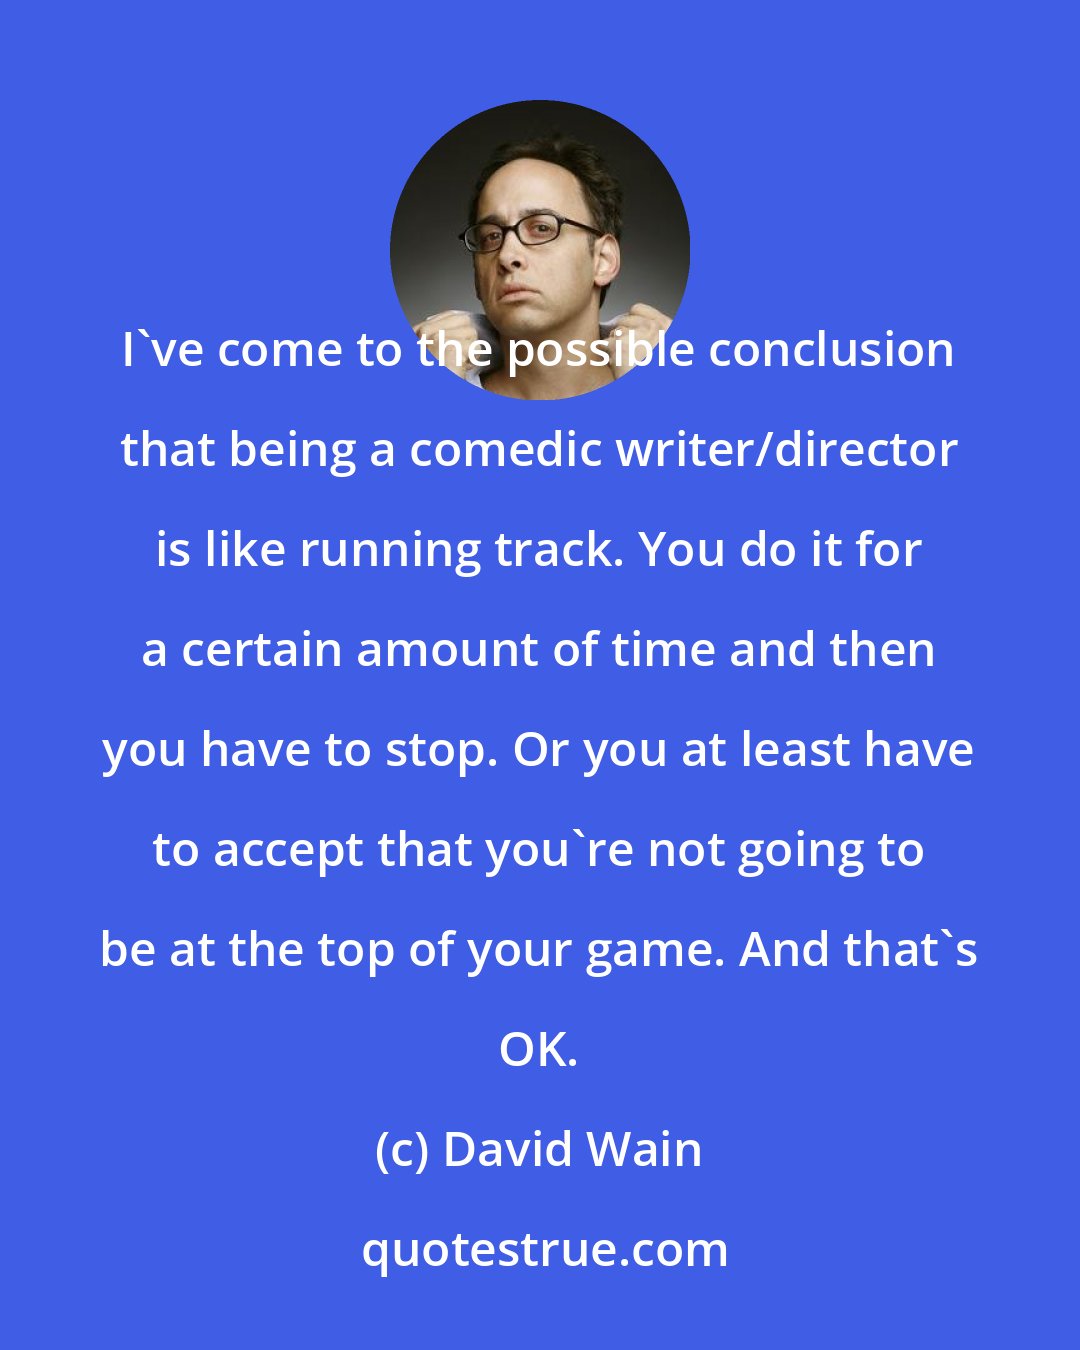 David Wain: I've come to the possible conclusion that being a comedic writer/director is like running track. You do it for a certain amount of time and then you have to stop. Or you at least have to accept that you're not going to be at the top of your game. And that's OK.